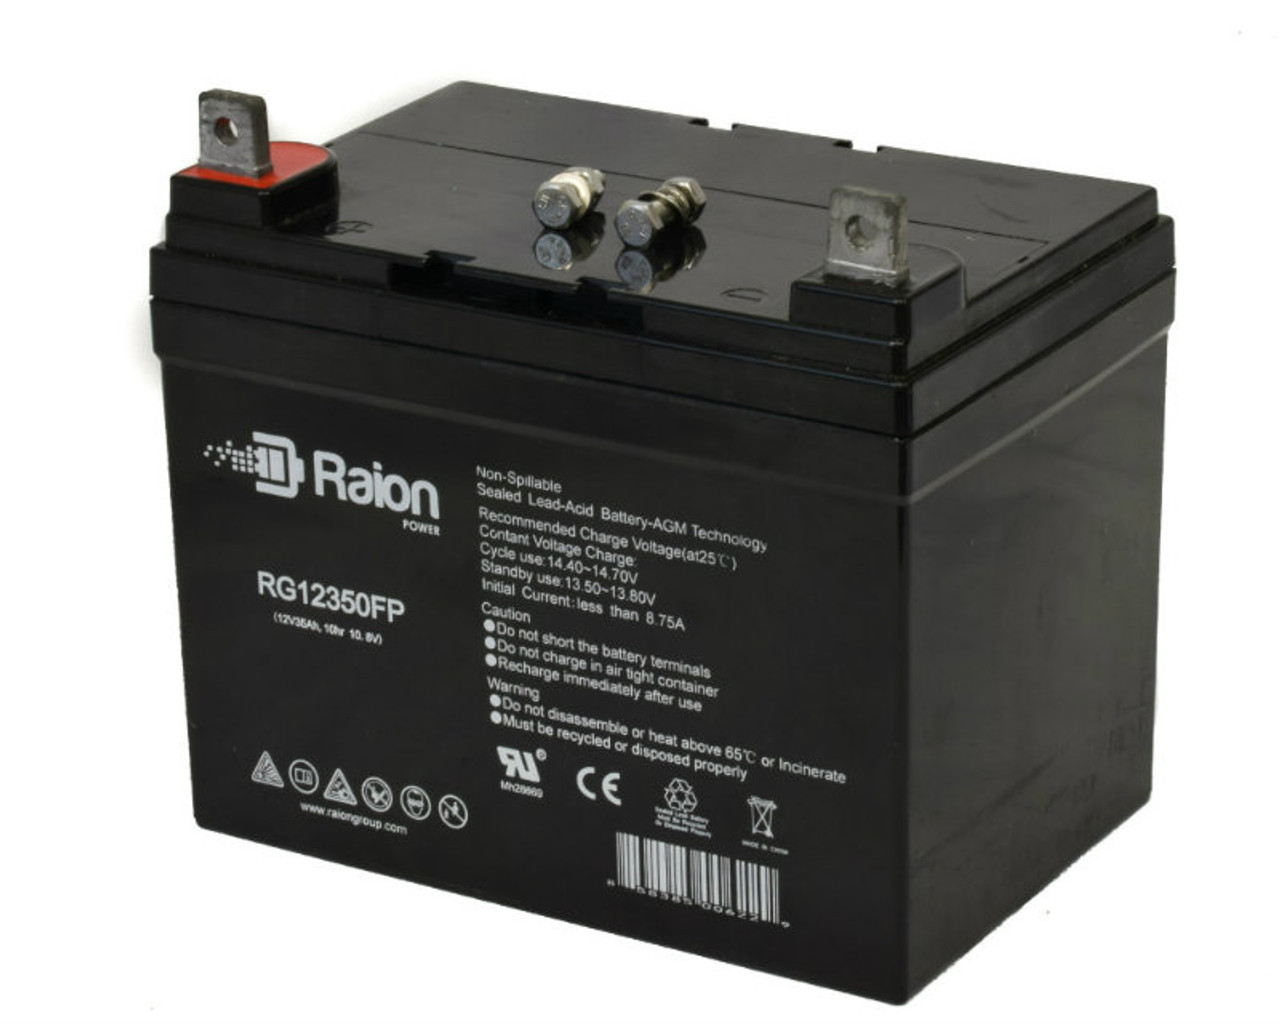 Raion Power Replacement 12V 35Ah RG12350FP Battery for Clipper 7224G